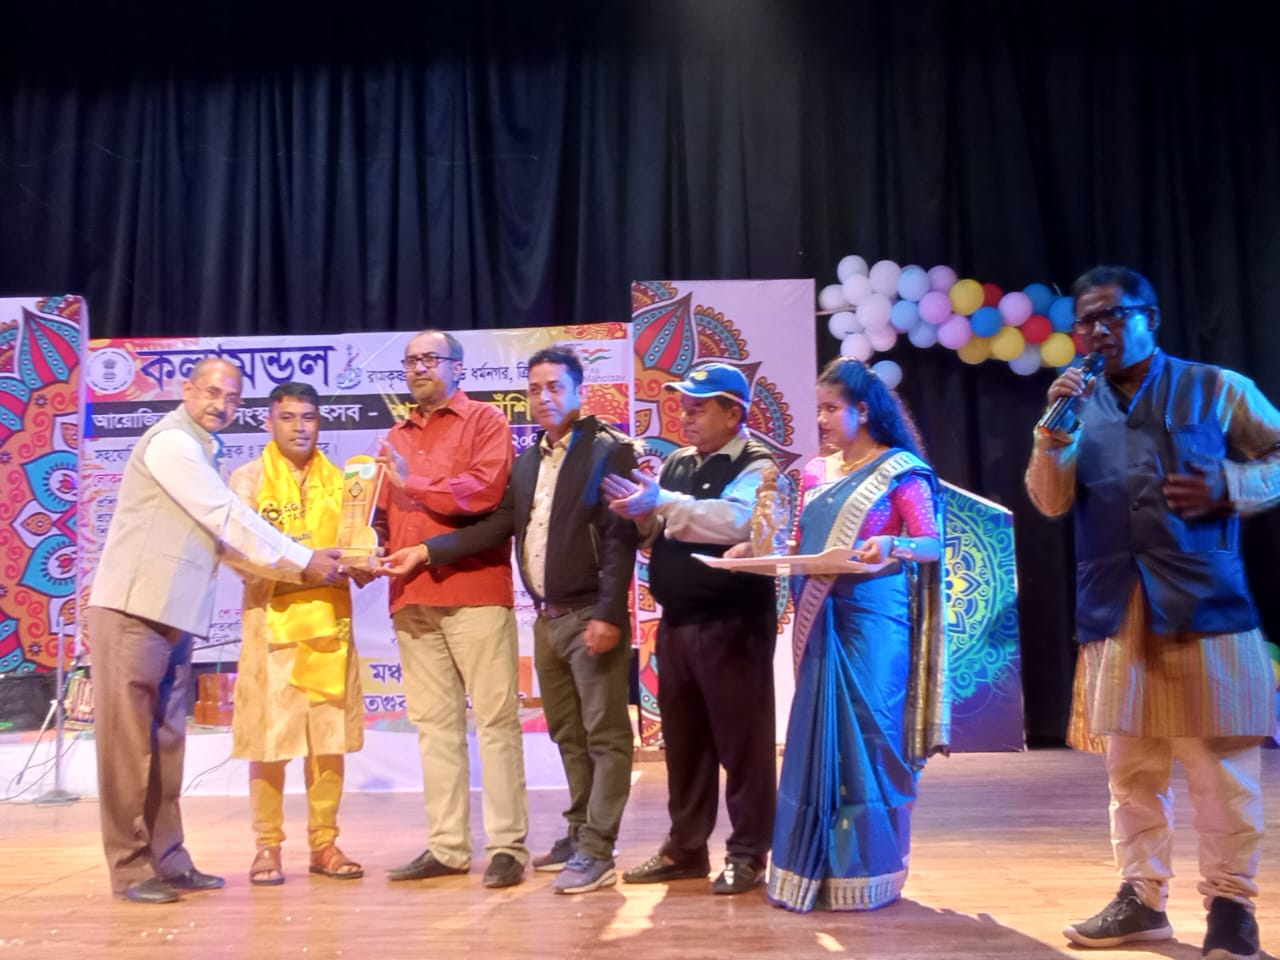 FELICITATION TO THE CULTURAL TEAM FROM BANGALADESH